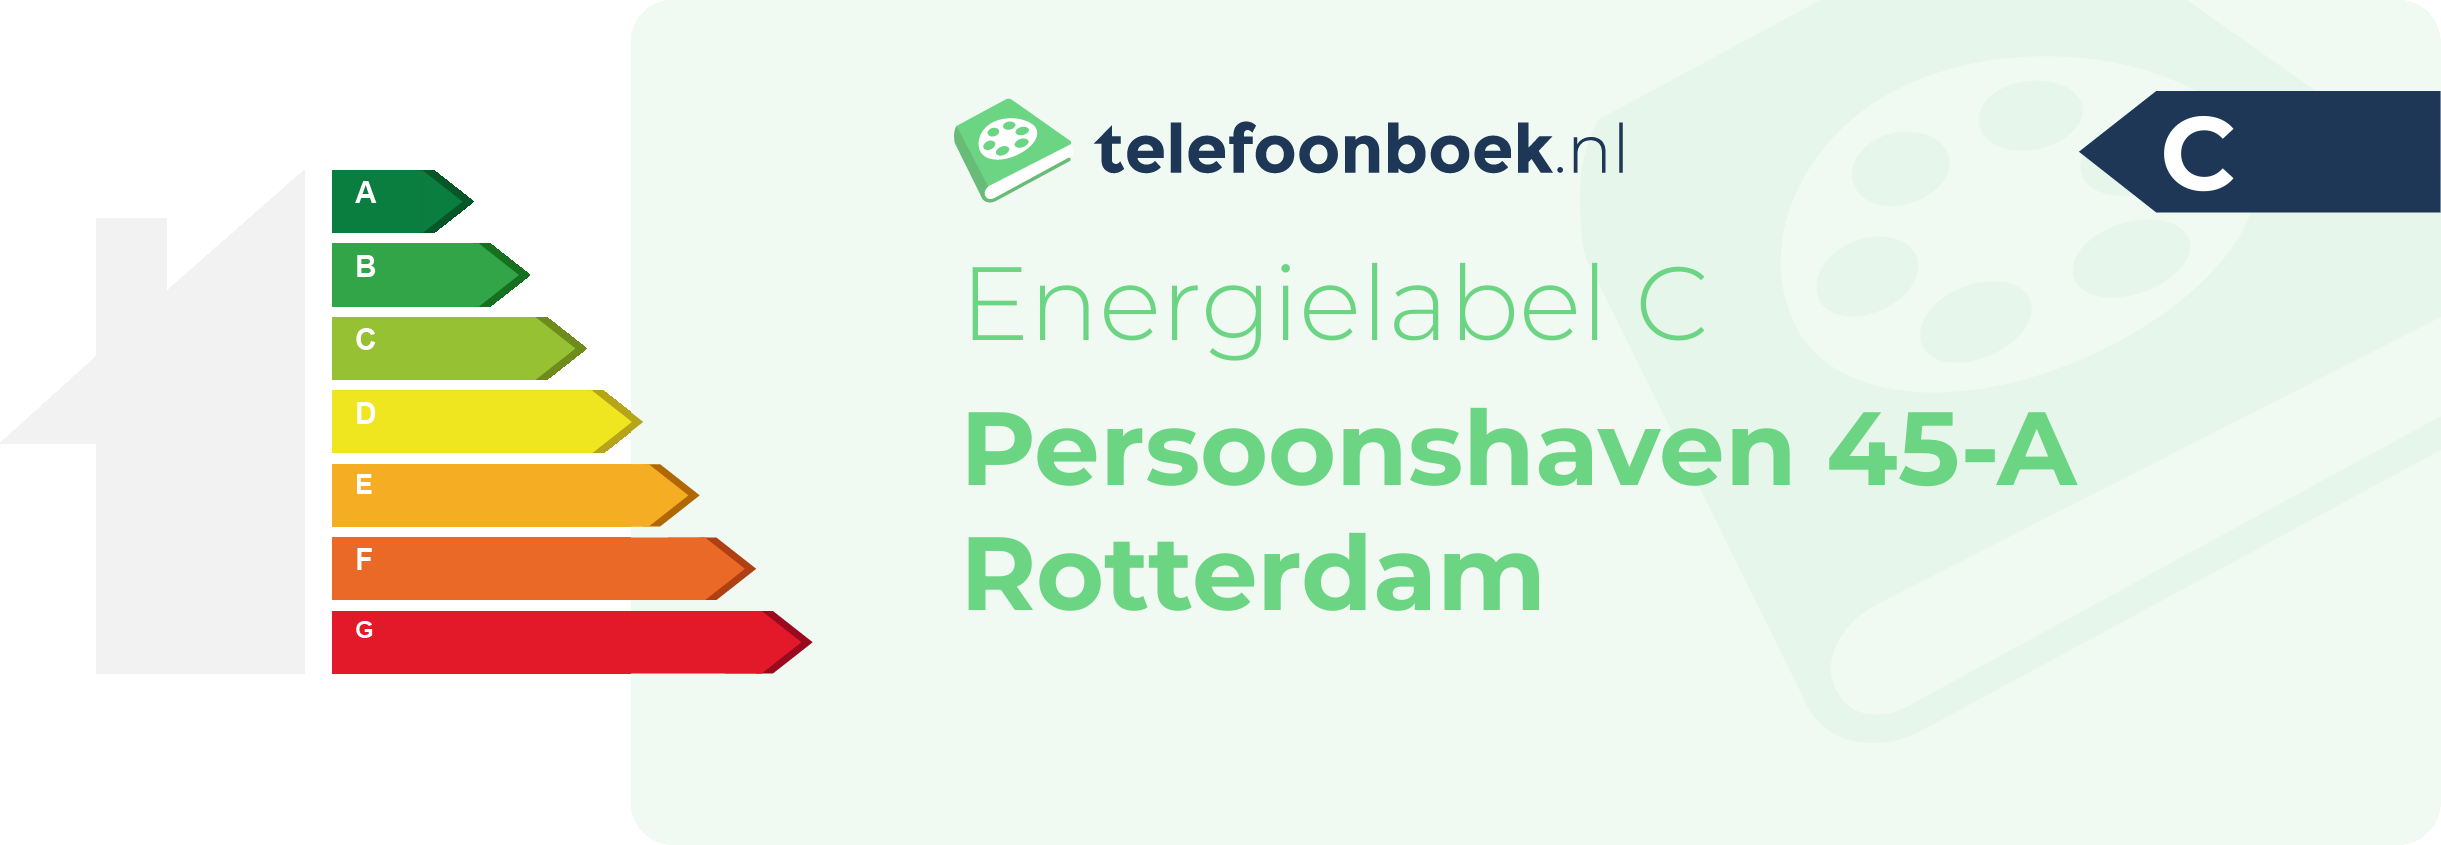 Energielabel Persoonshaven 45-A Rotterdam